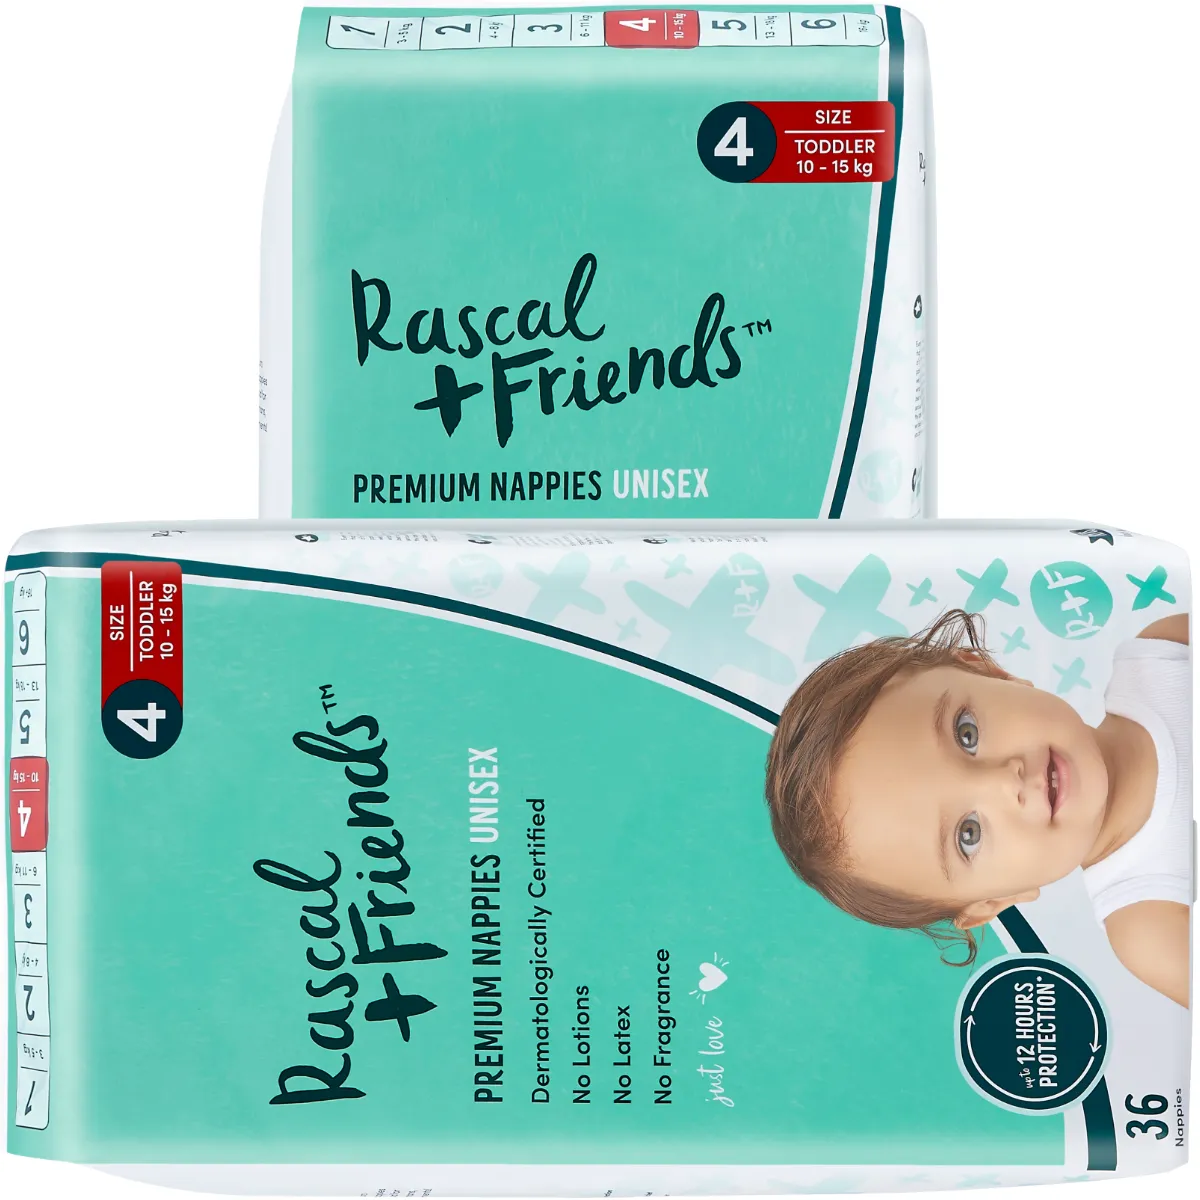 Free Rascal + Friends Nappy Sample Pack